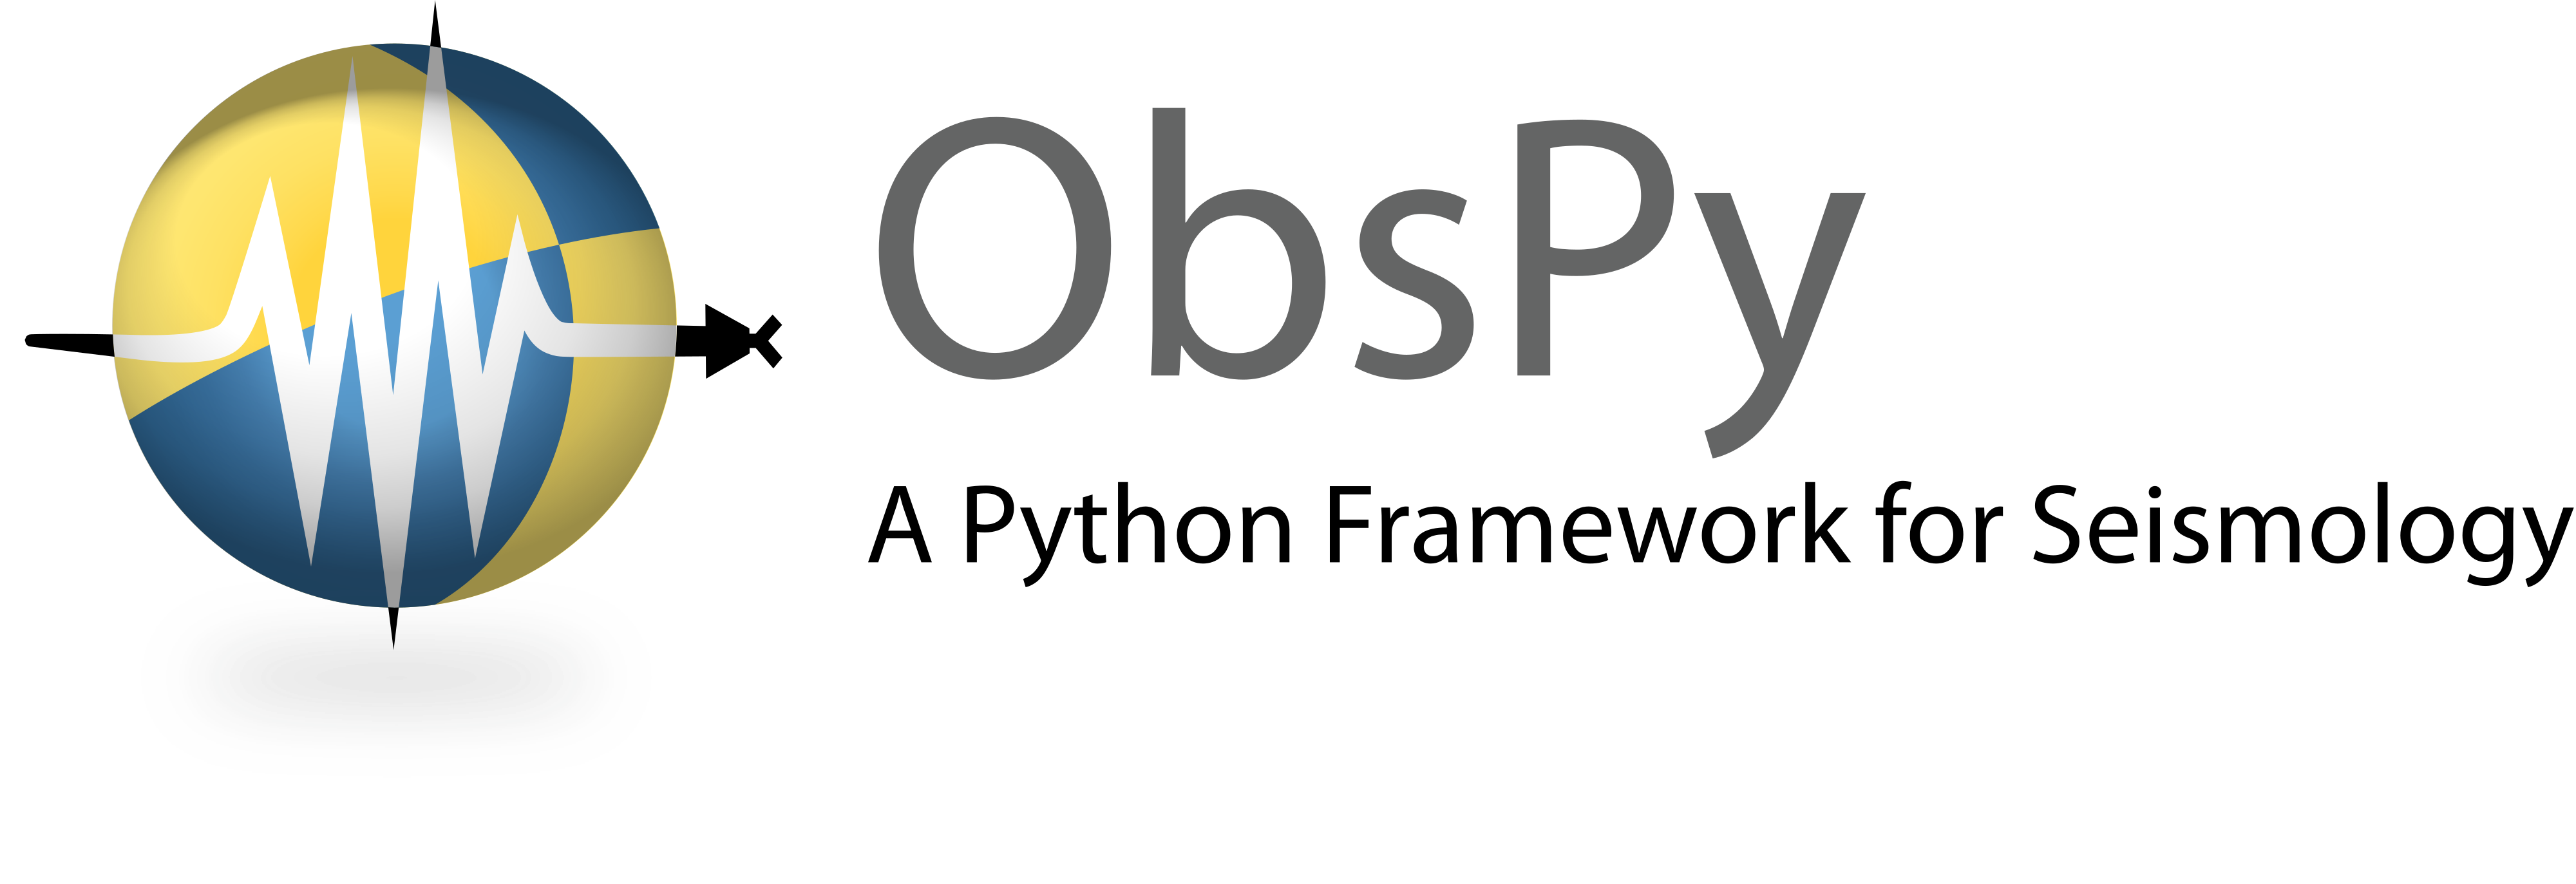 ObsPy: A Python Toolbox for seismology/seismological observatories.